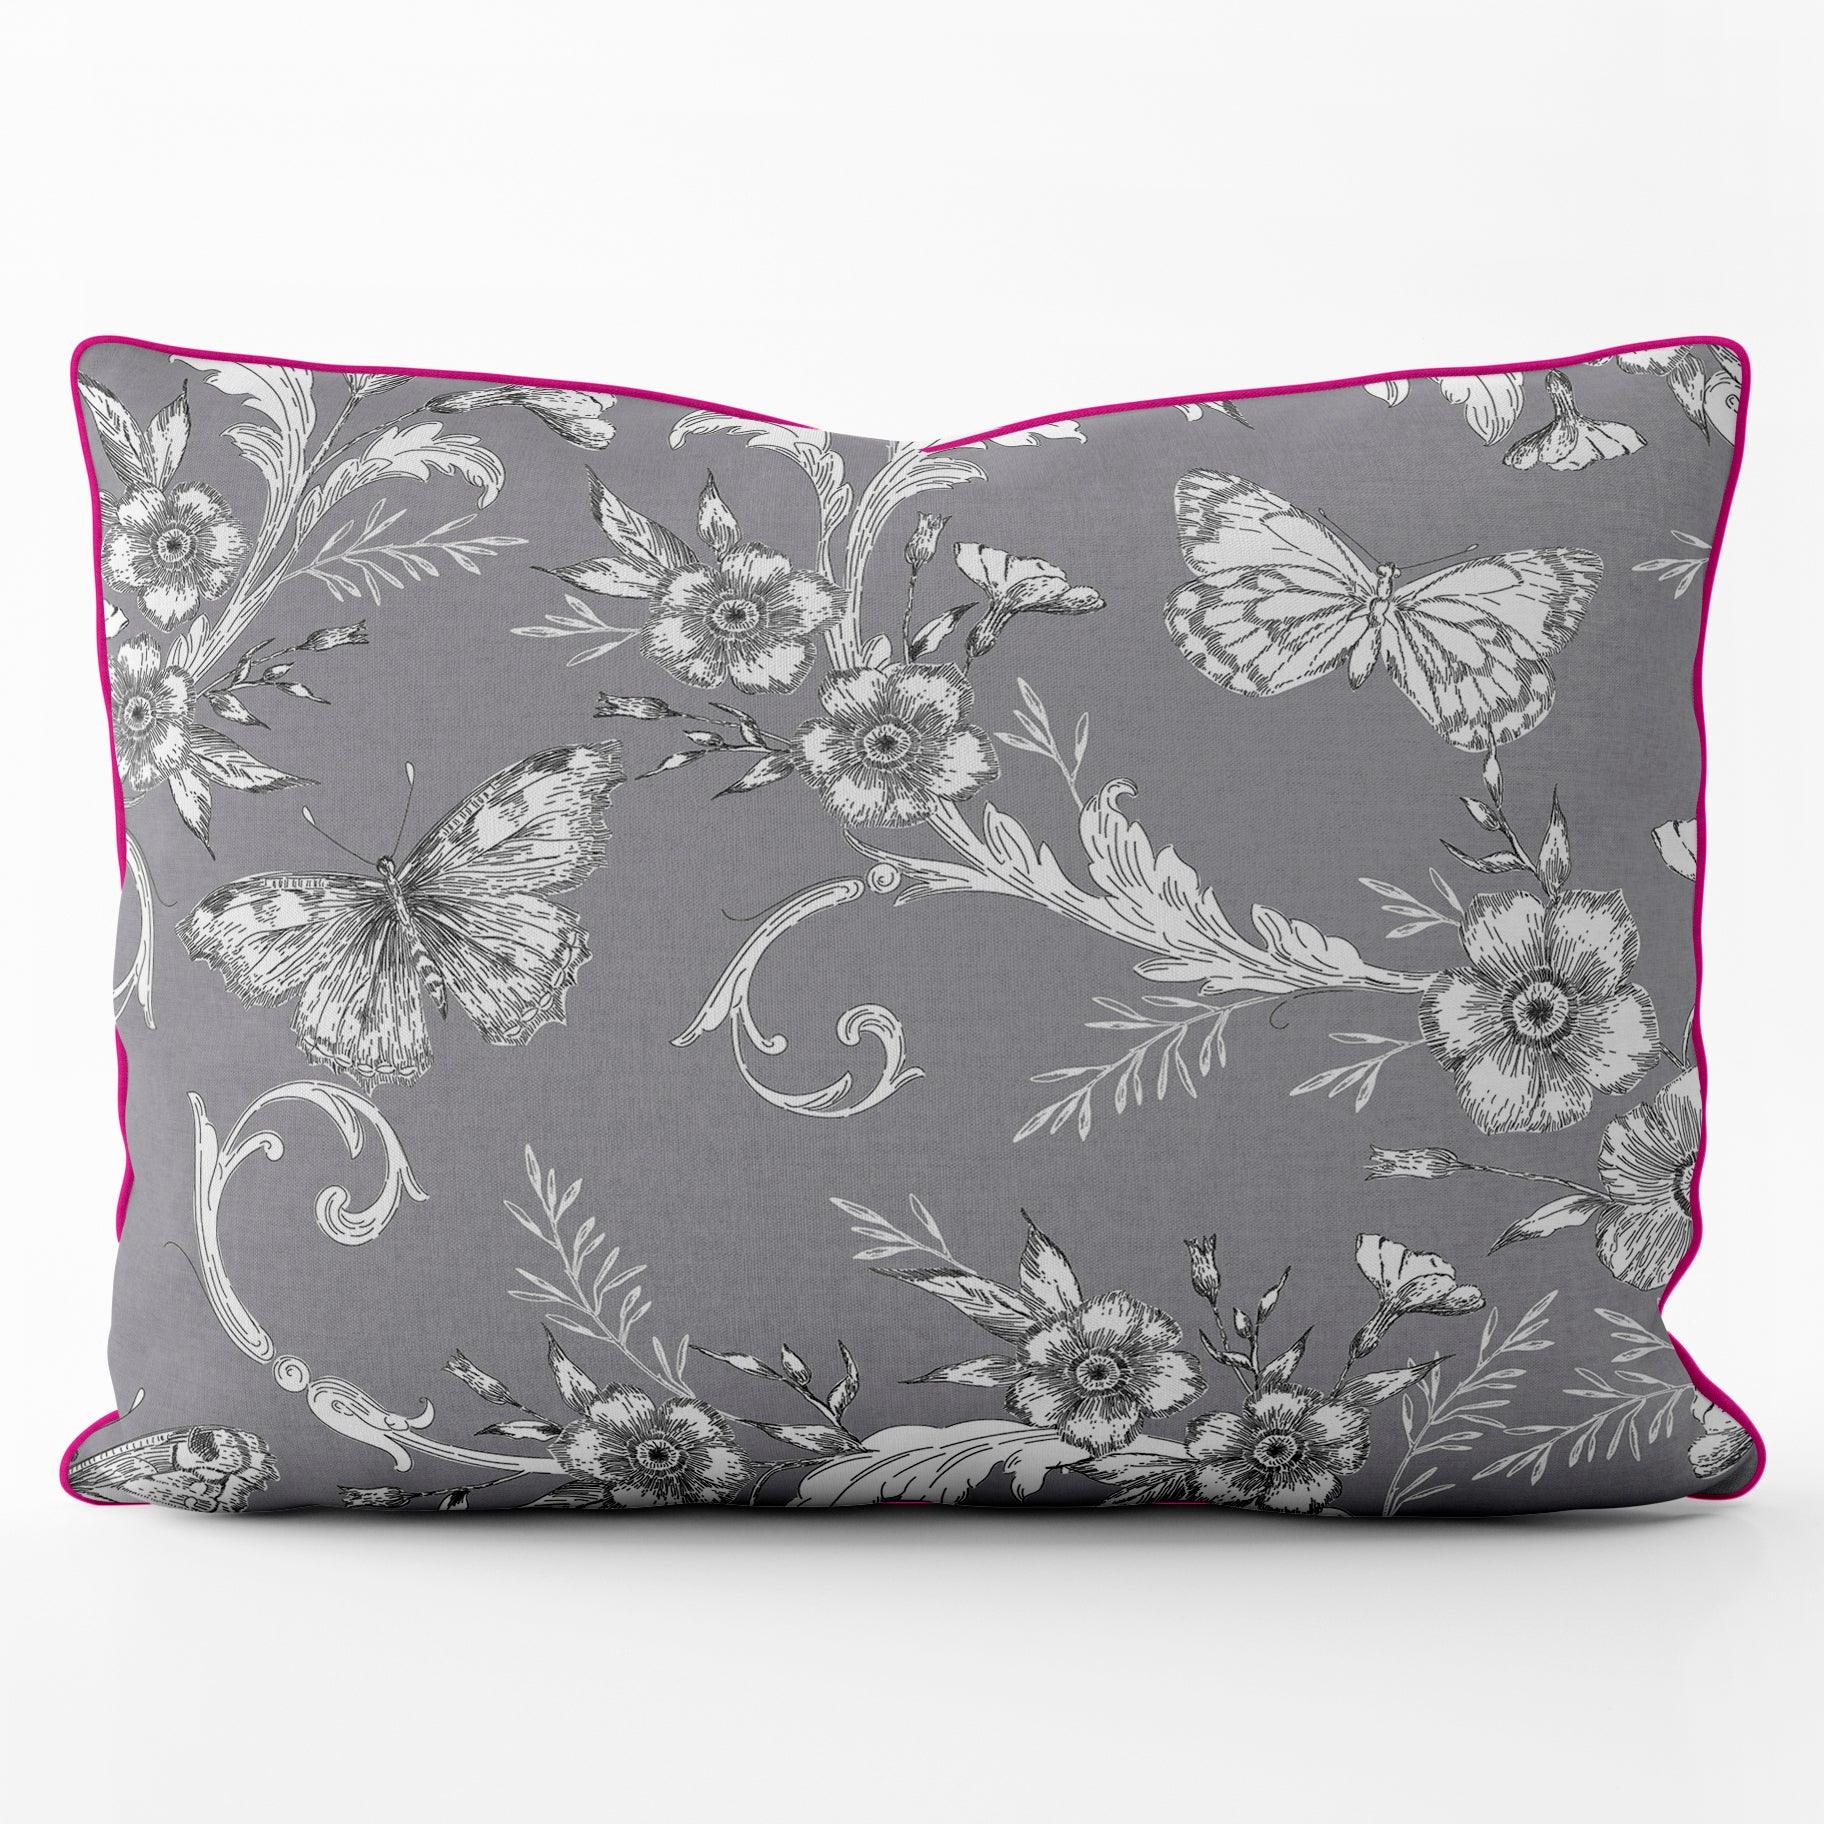 Trailing Butterfly Grey Landscape - House Of Turnowsky Cushion